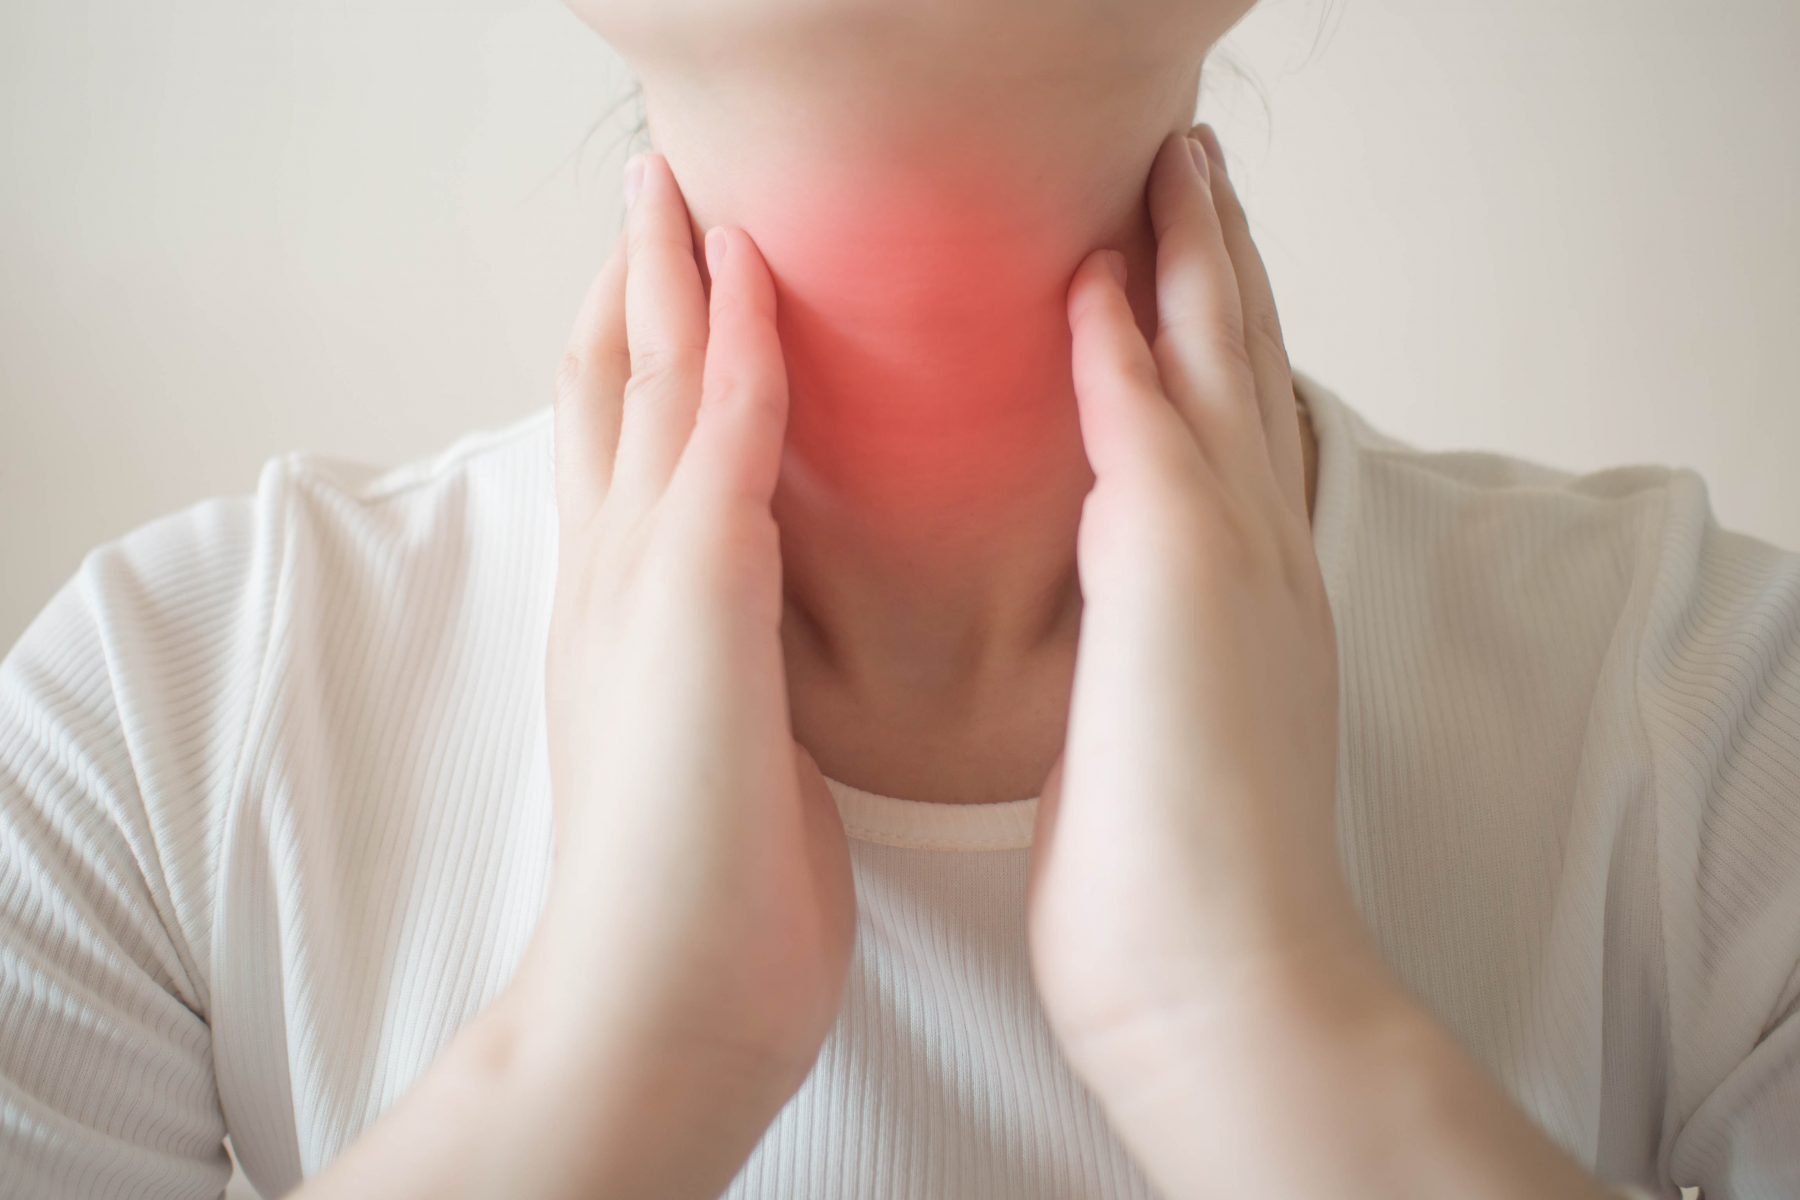 Female checking thyroid gland after swelling